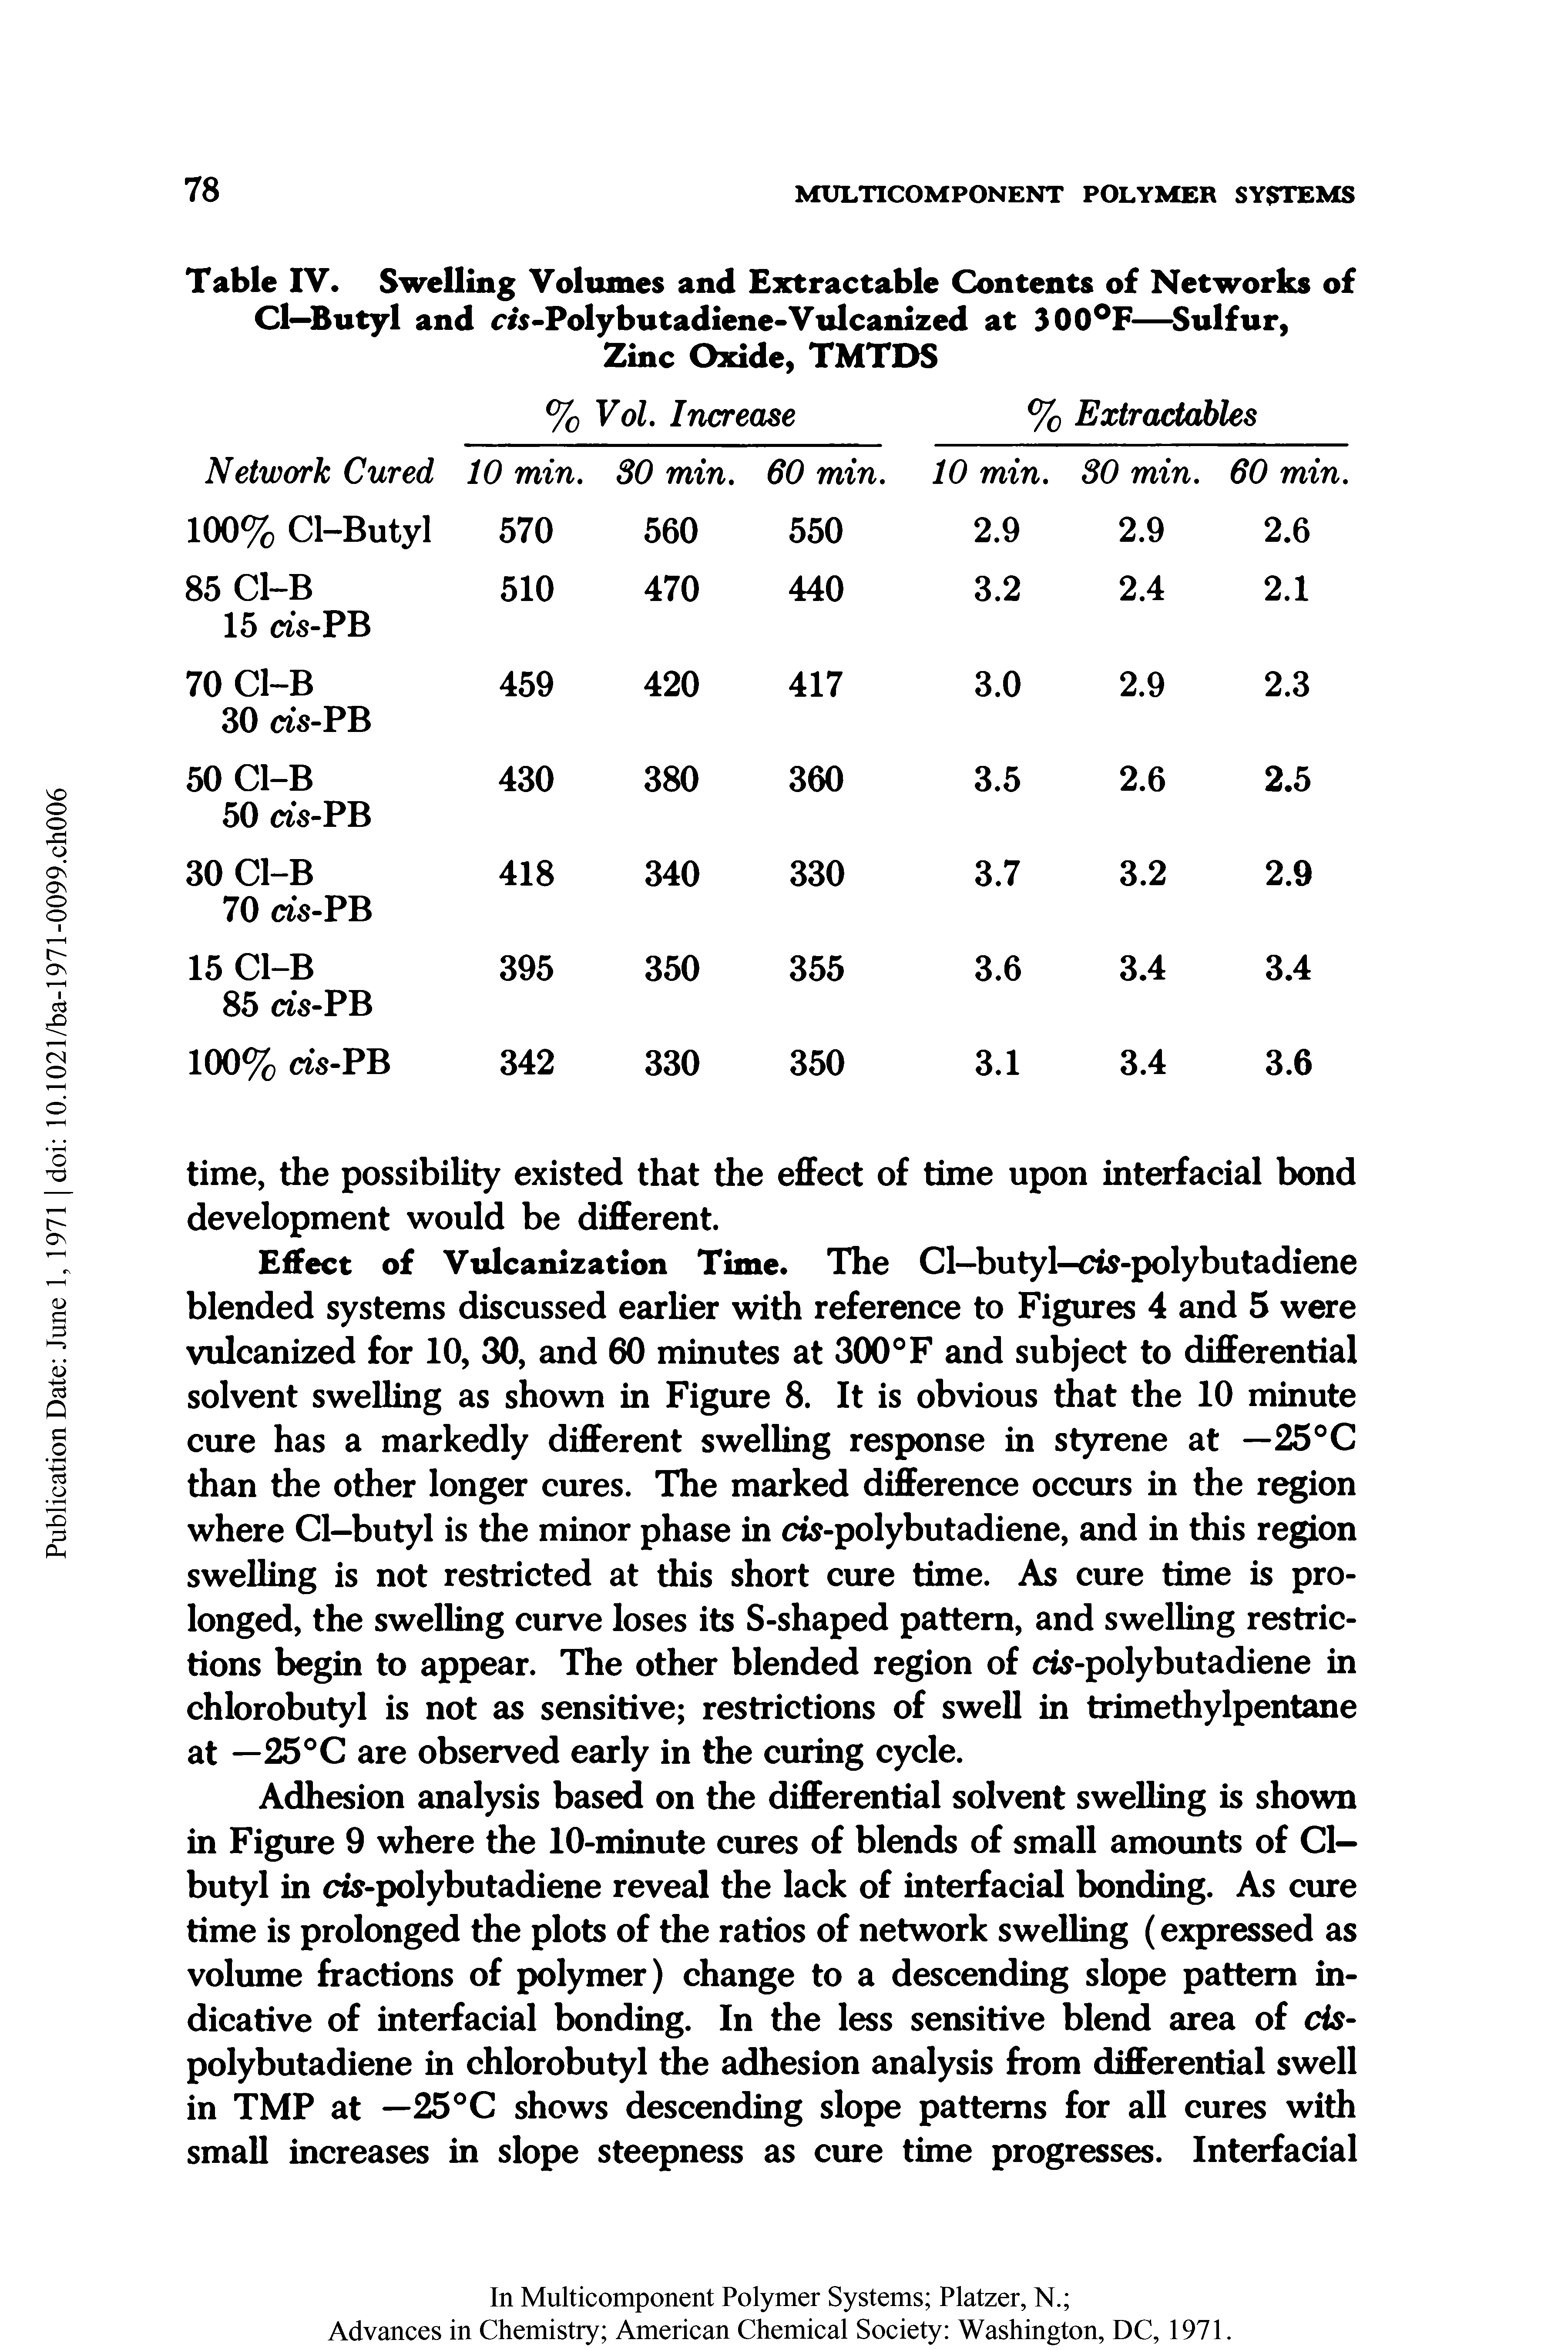 Table IV. Swelling Volumes and Extractable Contents of Networks of Cl—Butyl and cis-Polybutadiene-Vulcanized at 300°F—Sulfur, Zinc Oxide, TMTDS...